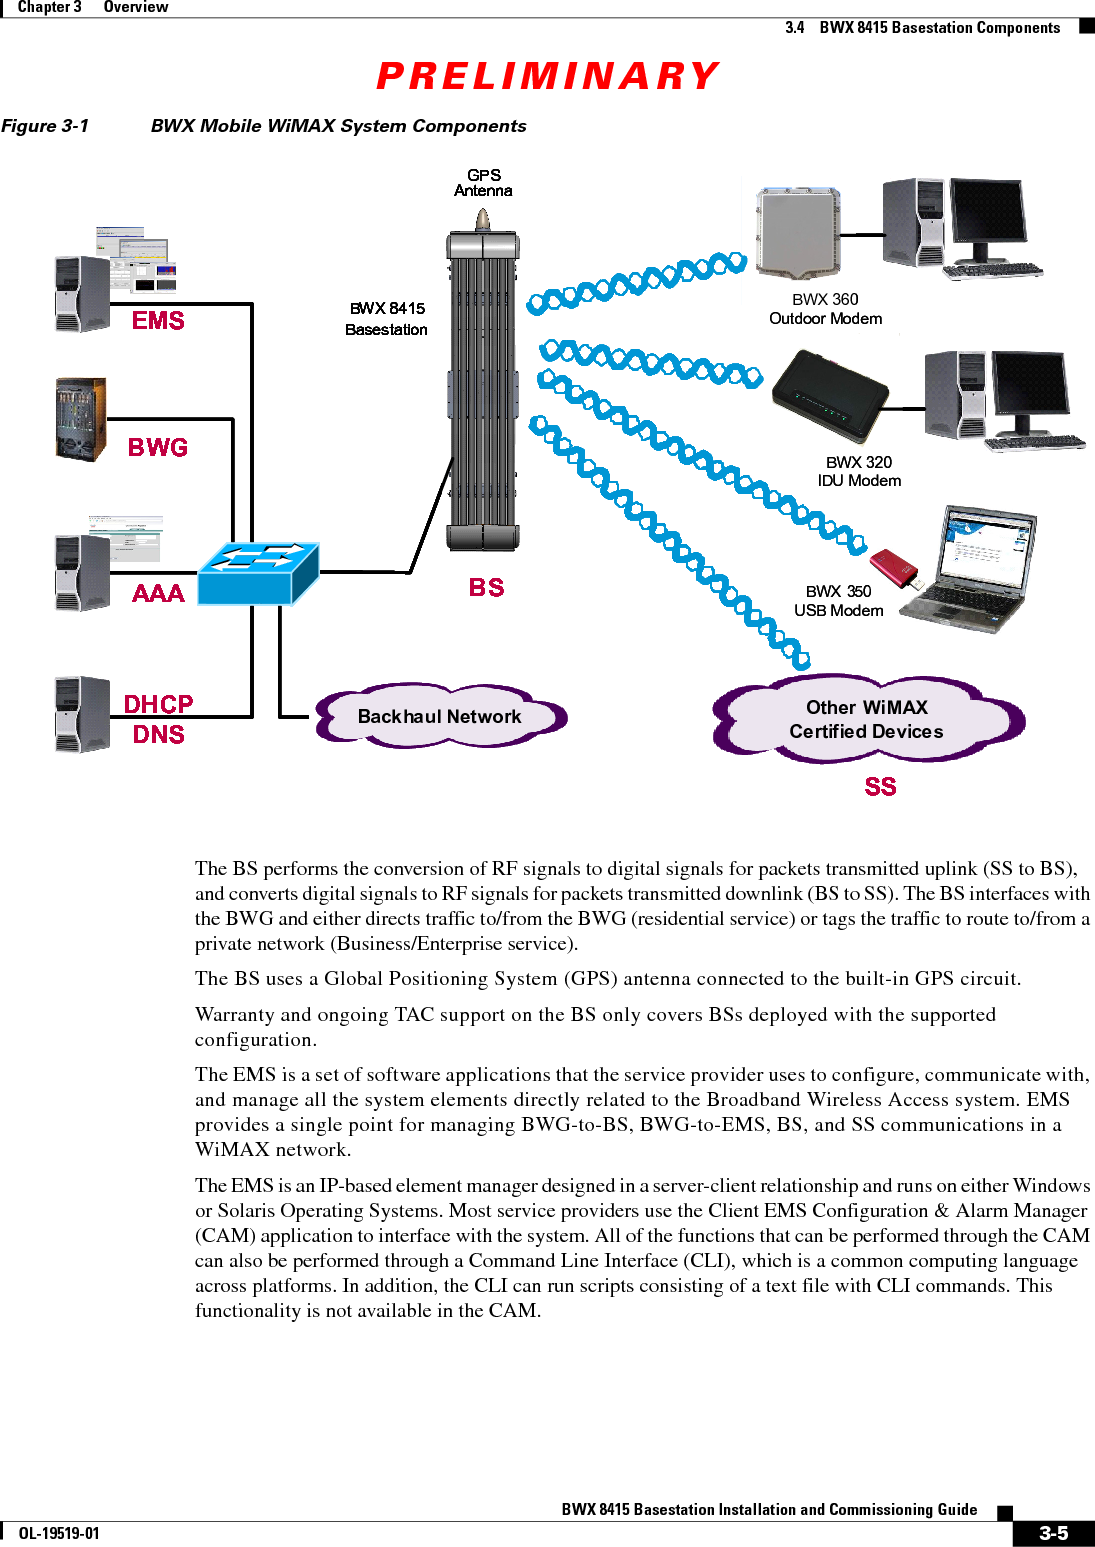 PRELIMINARY3-5BWX 8415 Basestation Installation and Commissioning GuideOL-19519-01Chapter 3      Overview3.4    BWX 8415 Basestation ComponentsFigure 3-1 BWX Mobile WiMAX System ComponentsThe BS performs the conversion of RF signals to digital signals for packets transmitted uplink (SS to BS), and converts digital signals to RF signals for packets transmitted downlink (BS to SS). The BS interfaces with the BWG and either directs traffic to/from the BWG (residential service) or tags the traffic to route to/from a private network (Business/Enterprise service).The BS uses a Global Positioning System (GPS) antenna connected to the built-in GPS circuit. Warranty and ongoing TAC support on the BS only covers BSs deployed with the supported configuration.The EMS is a set of software applications that the service provider uses to configure, communicate with, and manage all the system elements directly related to the Broadband Wireless Access system. EMS provides a single point for managing BWG-to-BS, BWG-to-EMS, BS, and SS communications in a WiMAX network.The EMS is an IP-based element manager designed in a server-client relationship and runs on either Windows or Solaris Operating Systems. Most service providers use the Client EMS Configuration &amp; Alarm Manager (CAM) application to interface with the system. All of the functions that can be performed through the CAM can also be performed through a Command Line Interface (CLI), which is a common computing language across platforms. In addition, the CLI can run scripts consisting of a text file with CLI commands. This functionality is not available in the CAM.BWX 8415BasestationGPSAntennaBWGEMSAAADHCPDNS Backhaul NetworkBSSSOther WiMAXCe rtifie d De vice sBWX 8415BasestationGPSAntennaBWGEMSAAADHCPDNS Backhaul NetworkBSSSOther WiMAXCe rtifie d De vice sBWX 8415BasestationGPSAntennaBWGEMSAAADHCPDNS Backhaul NetworkBackhaul NetworkBSSSBWX 350USB ModemOther WiMAXCe rtifie d De vice sOther WiMAXCe rtifie d De vice sBWX 320IDU ModemBWX 360Outdoor ModemBWX 8415BasestationGPSAntennaBWGEMSAAADHCPDNS Backhaul NetworkBSSSOther WiMAXCe rtifie d De vice sBWX 8415BasestationGPSAntennaBWGEMSAAADHCPDNS Backhaul NetworkBSSSOther WiMAXCe rtifie d De vice sBWX 8415BasestationGPSAntennaBWGEMSAAADHCPDNS Backhaul NetworkBackhaul NetworkBSSSBWX 350USB ModemOther WiMAXCe rtifie d De vice sOther WiMAXCe rtifie d De vice sBWX 320IDU ModemBWX 360Outdoor Modem